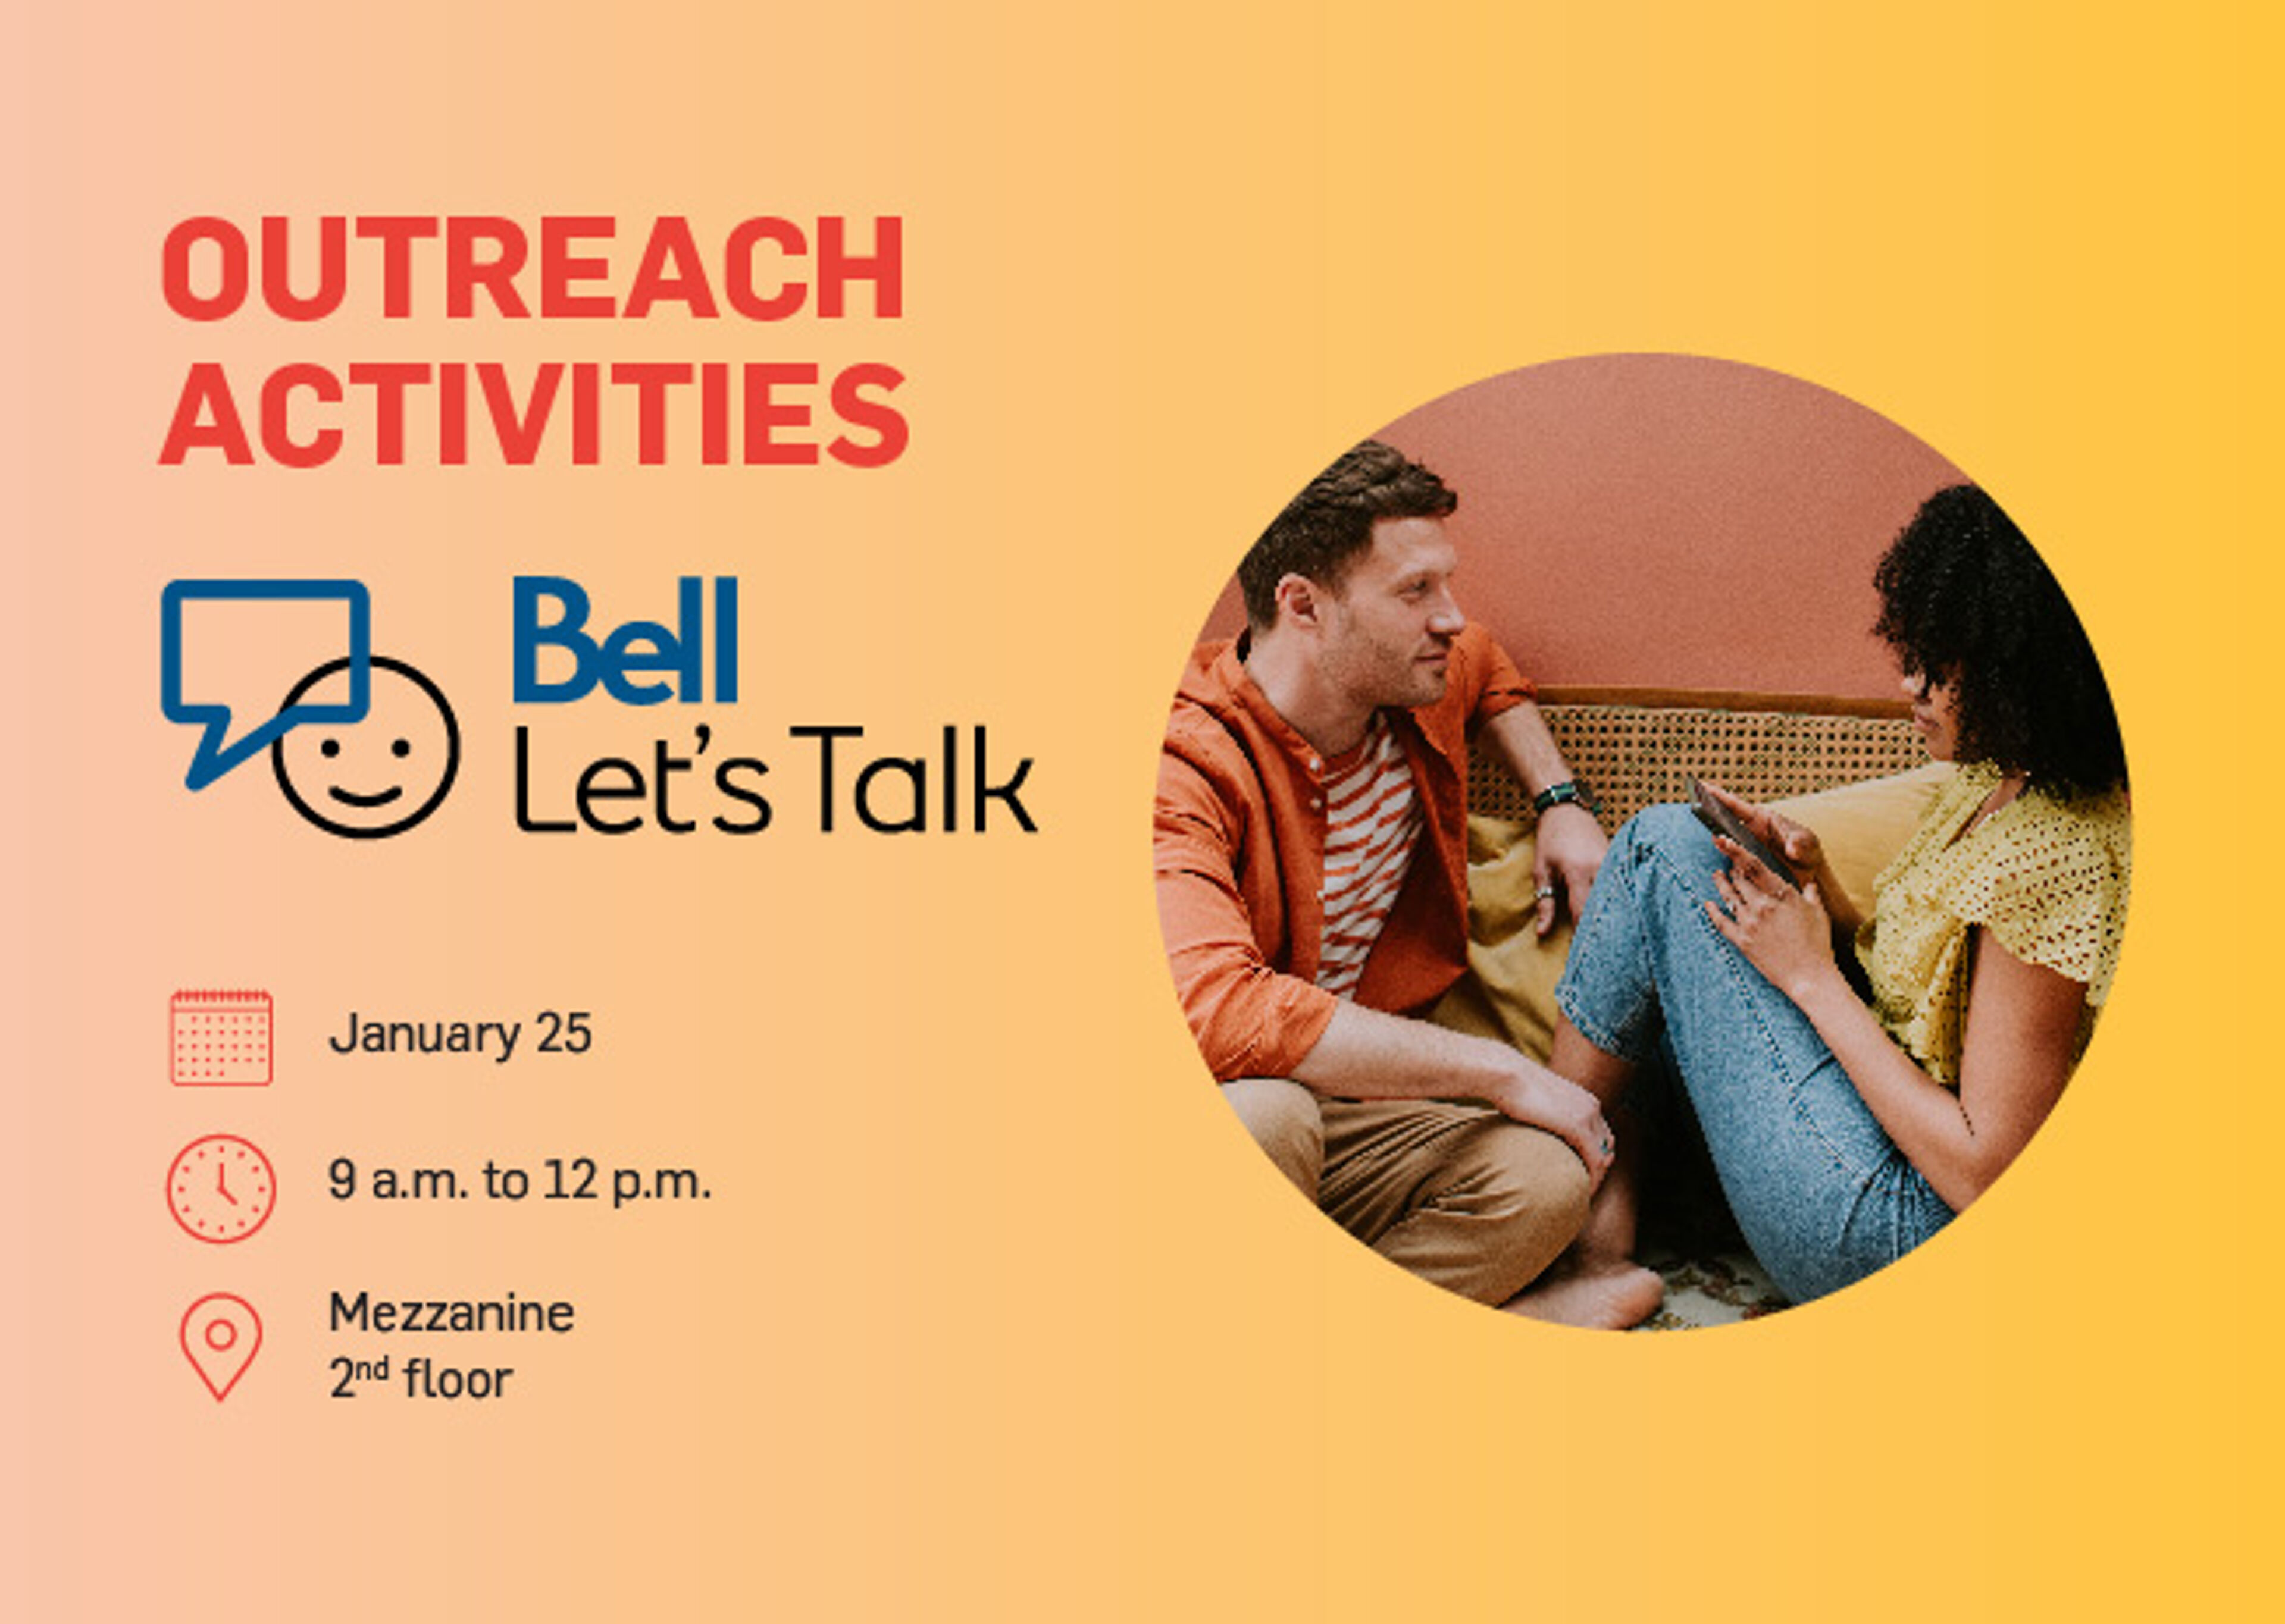 Promotional image for Bell's awareness campaign, featuring event details against a yellow background with a man and woman conversing.